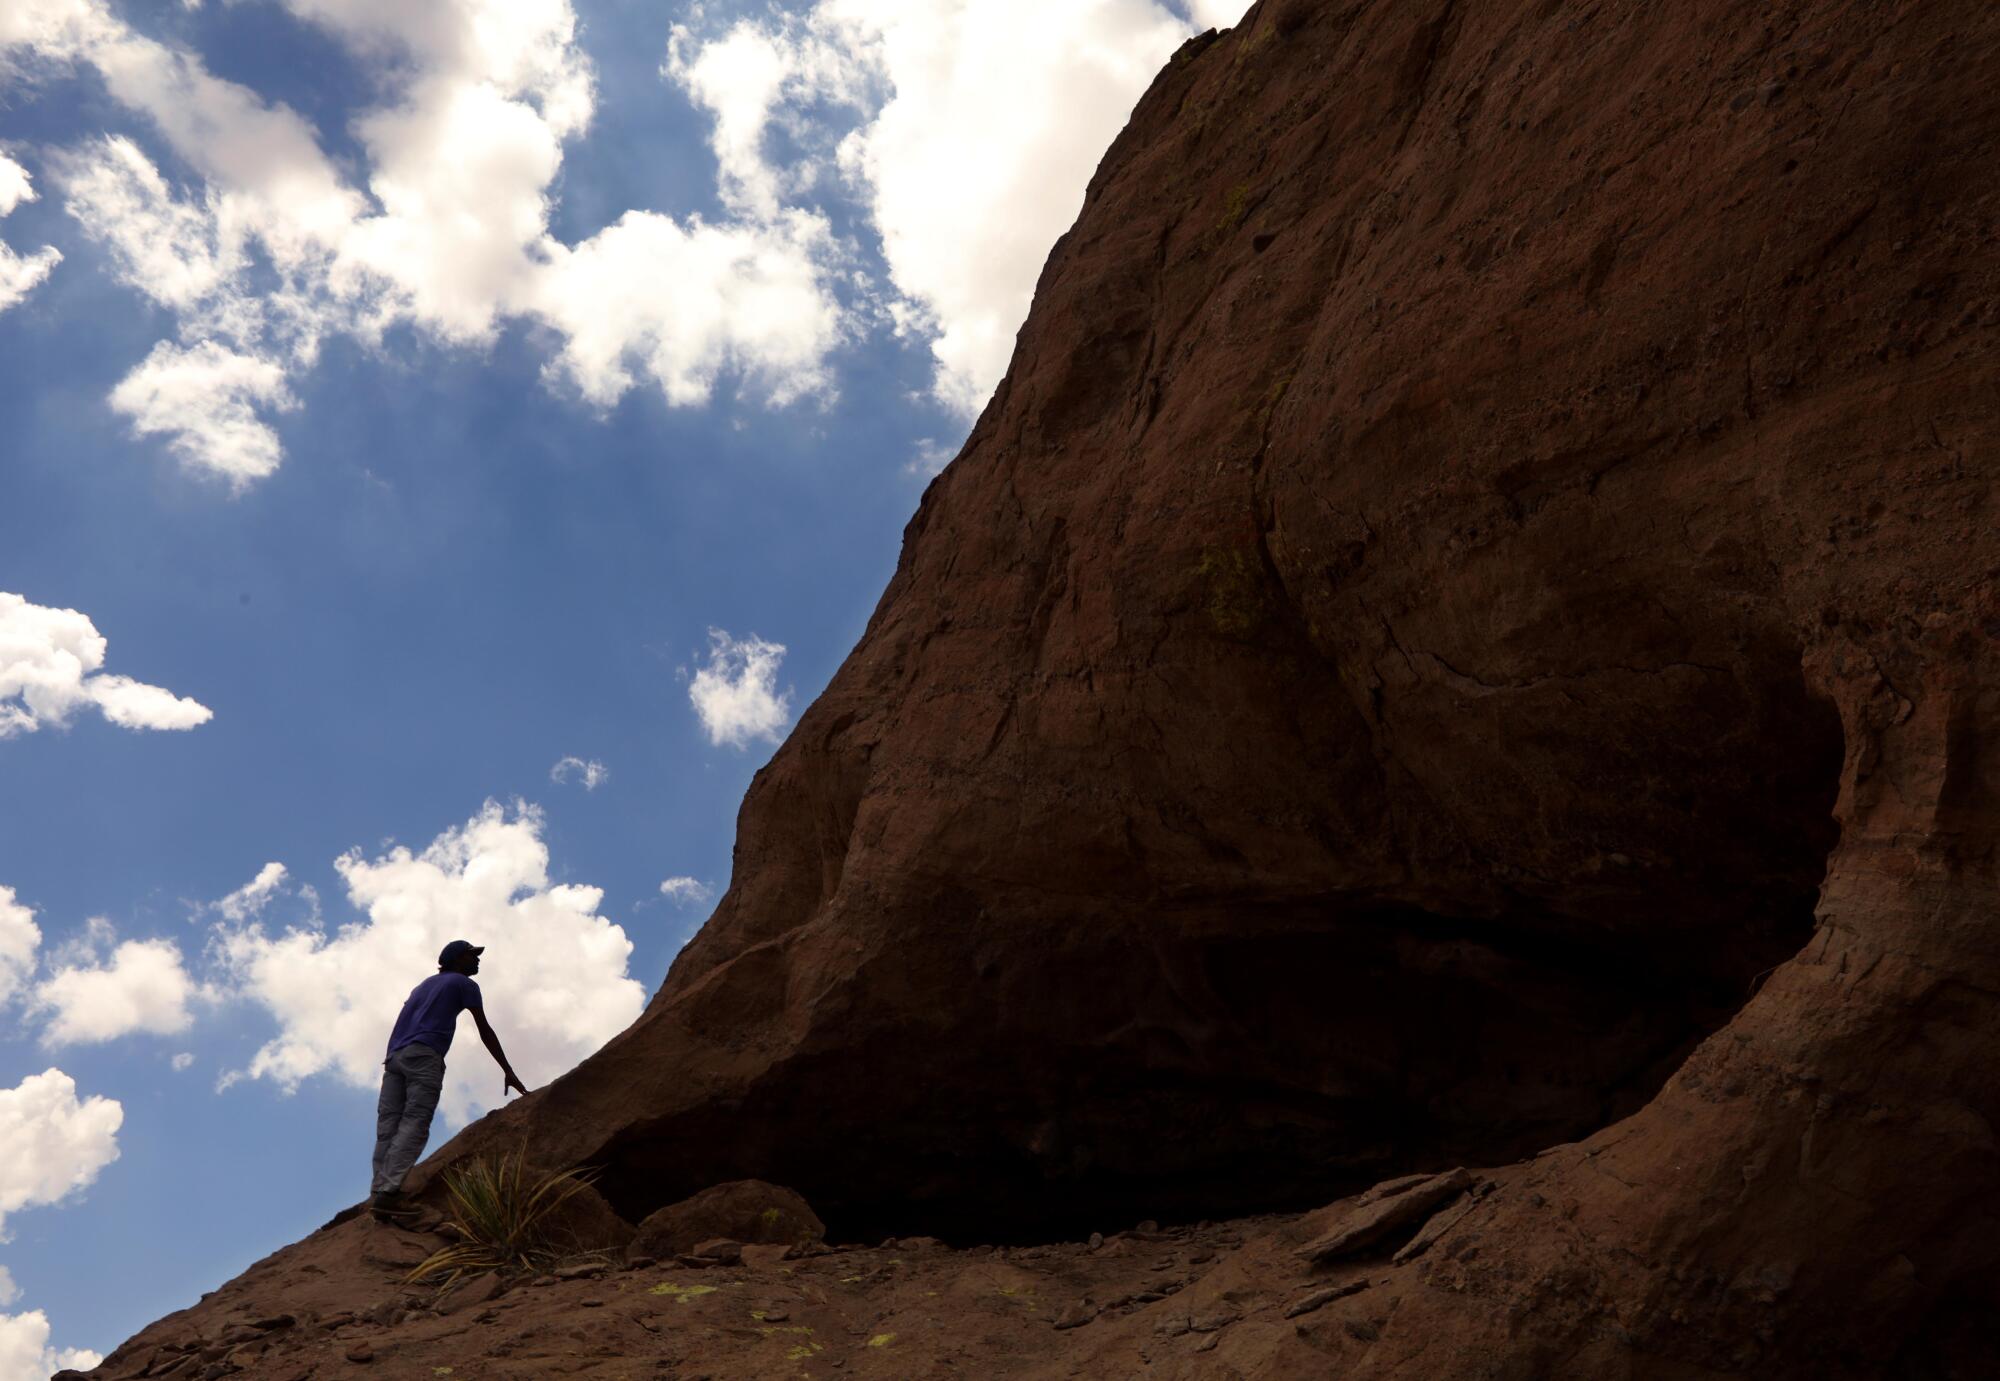 A visitor silhouetted against the sky by a rock shelf